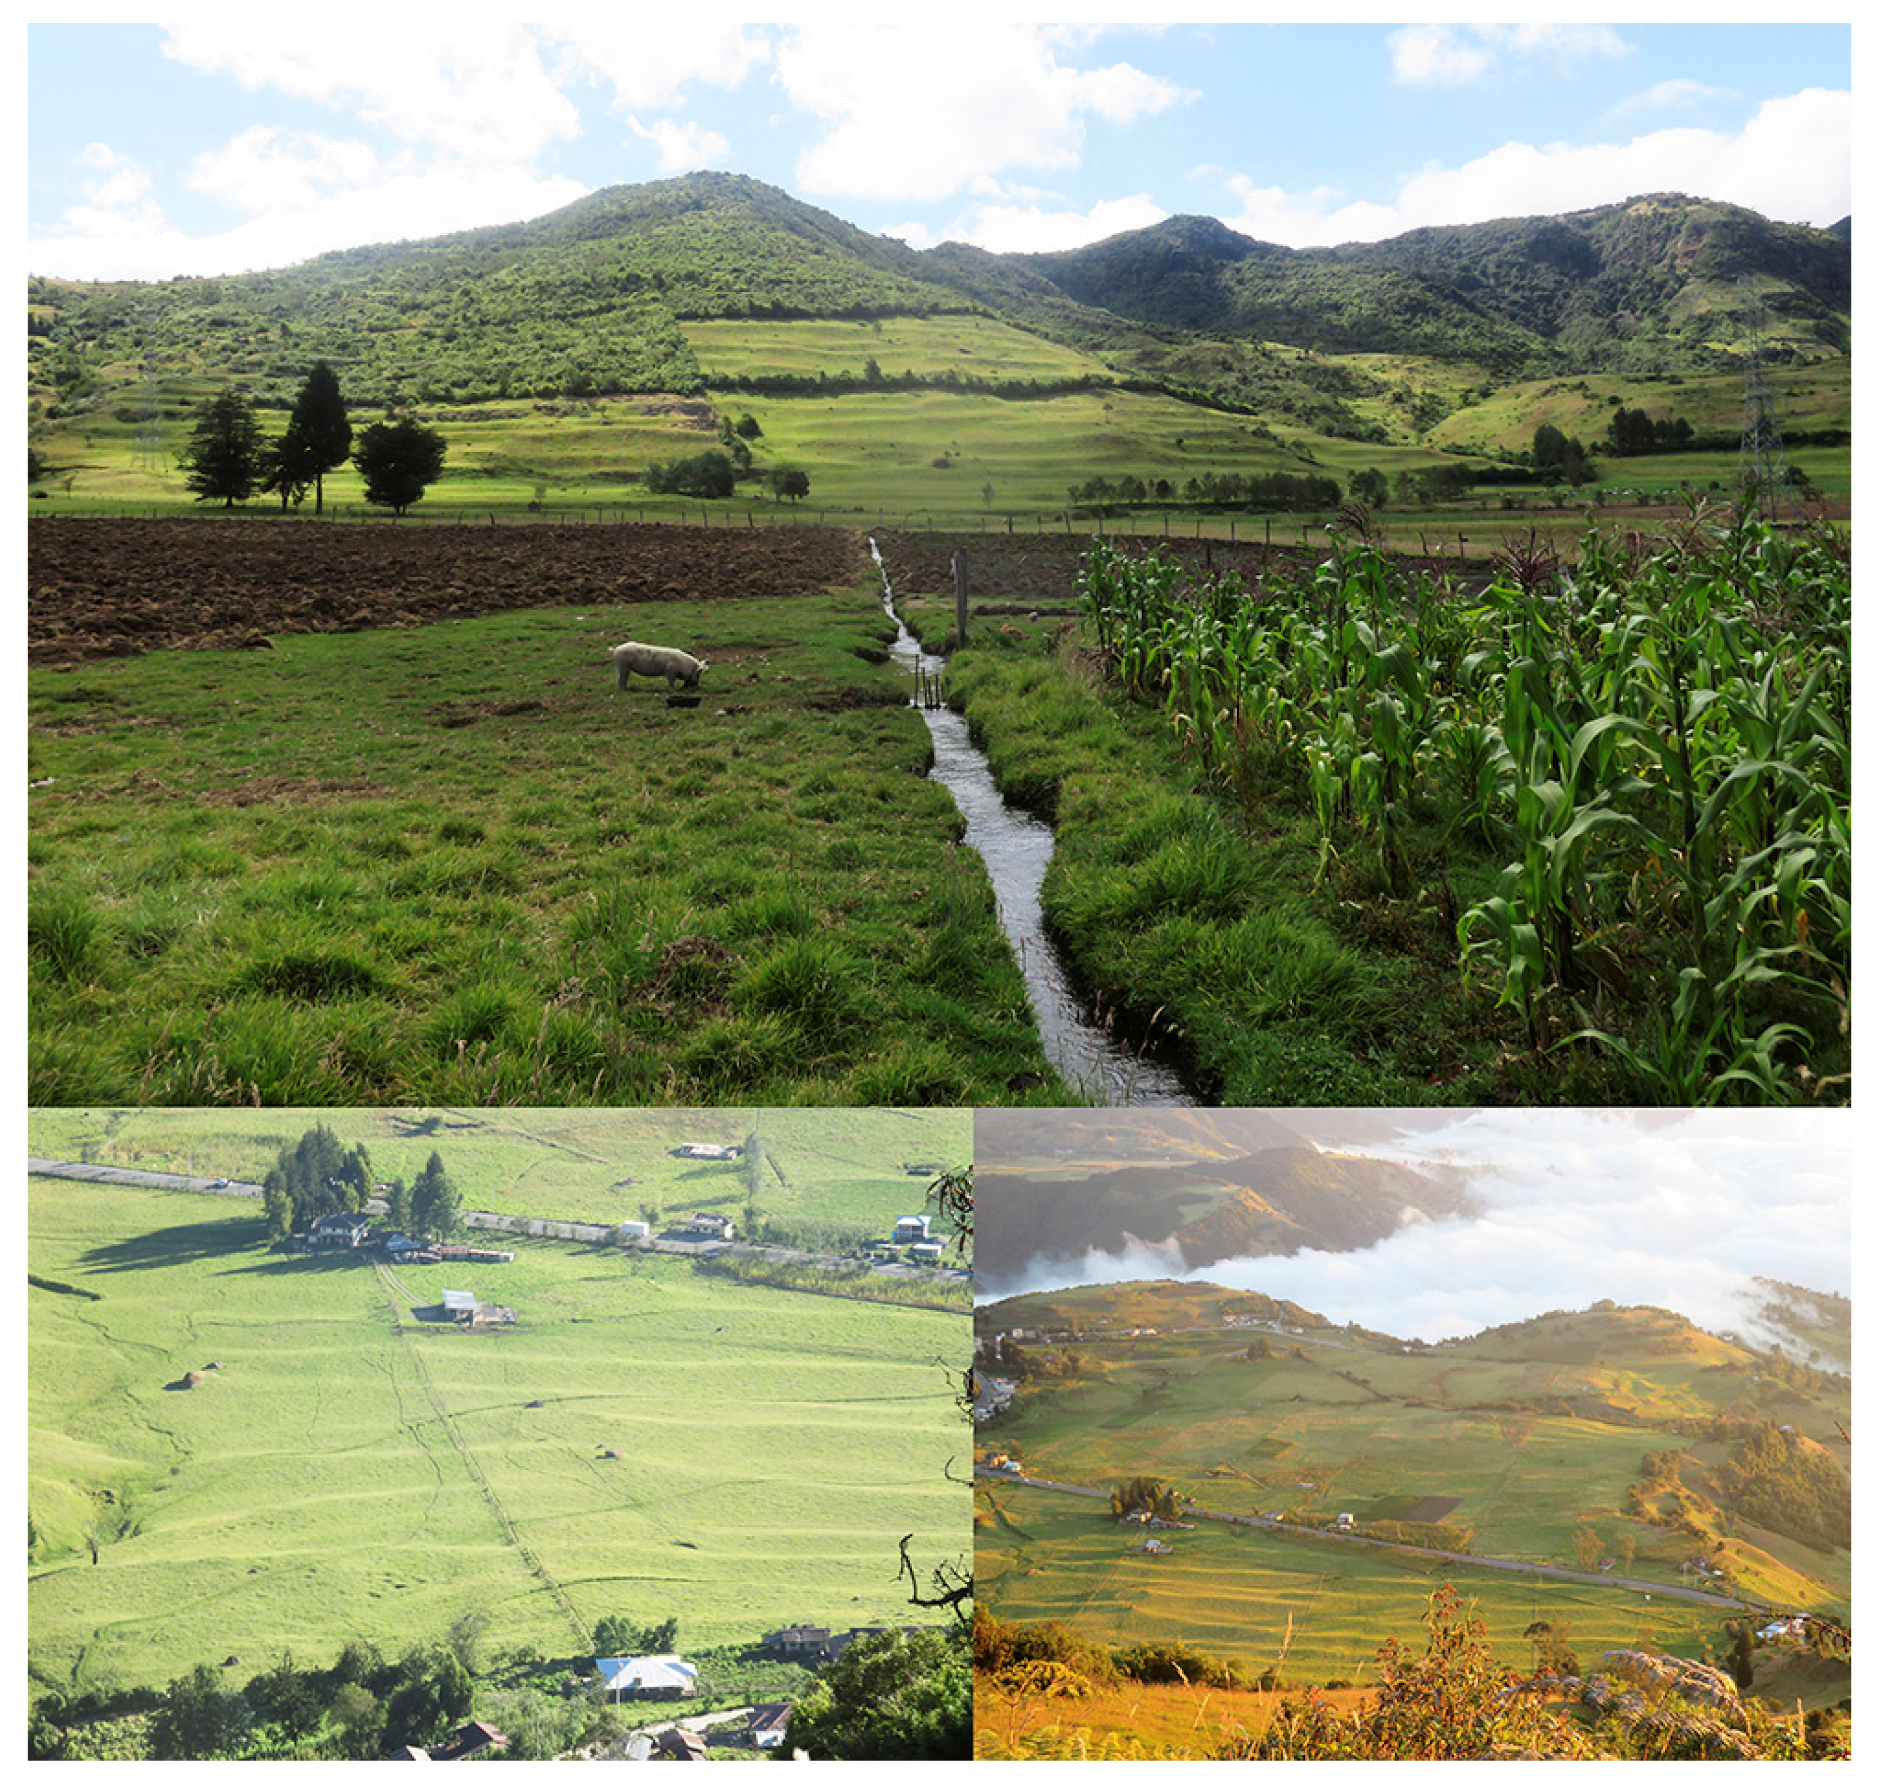 Land | Free Full-Text | The Archeological Landscape of the Chanchán Basin  and Its Agroecological Legacies for the Conservation of Montane Forests in  the Western Foothills of the Ecuadorian Andes